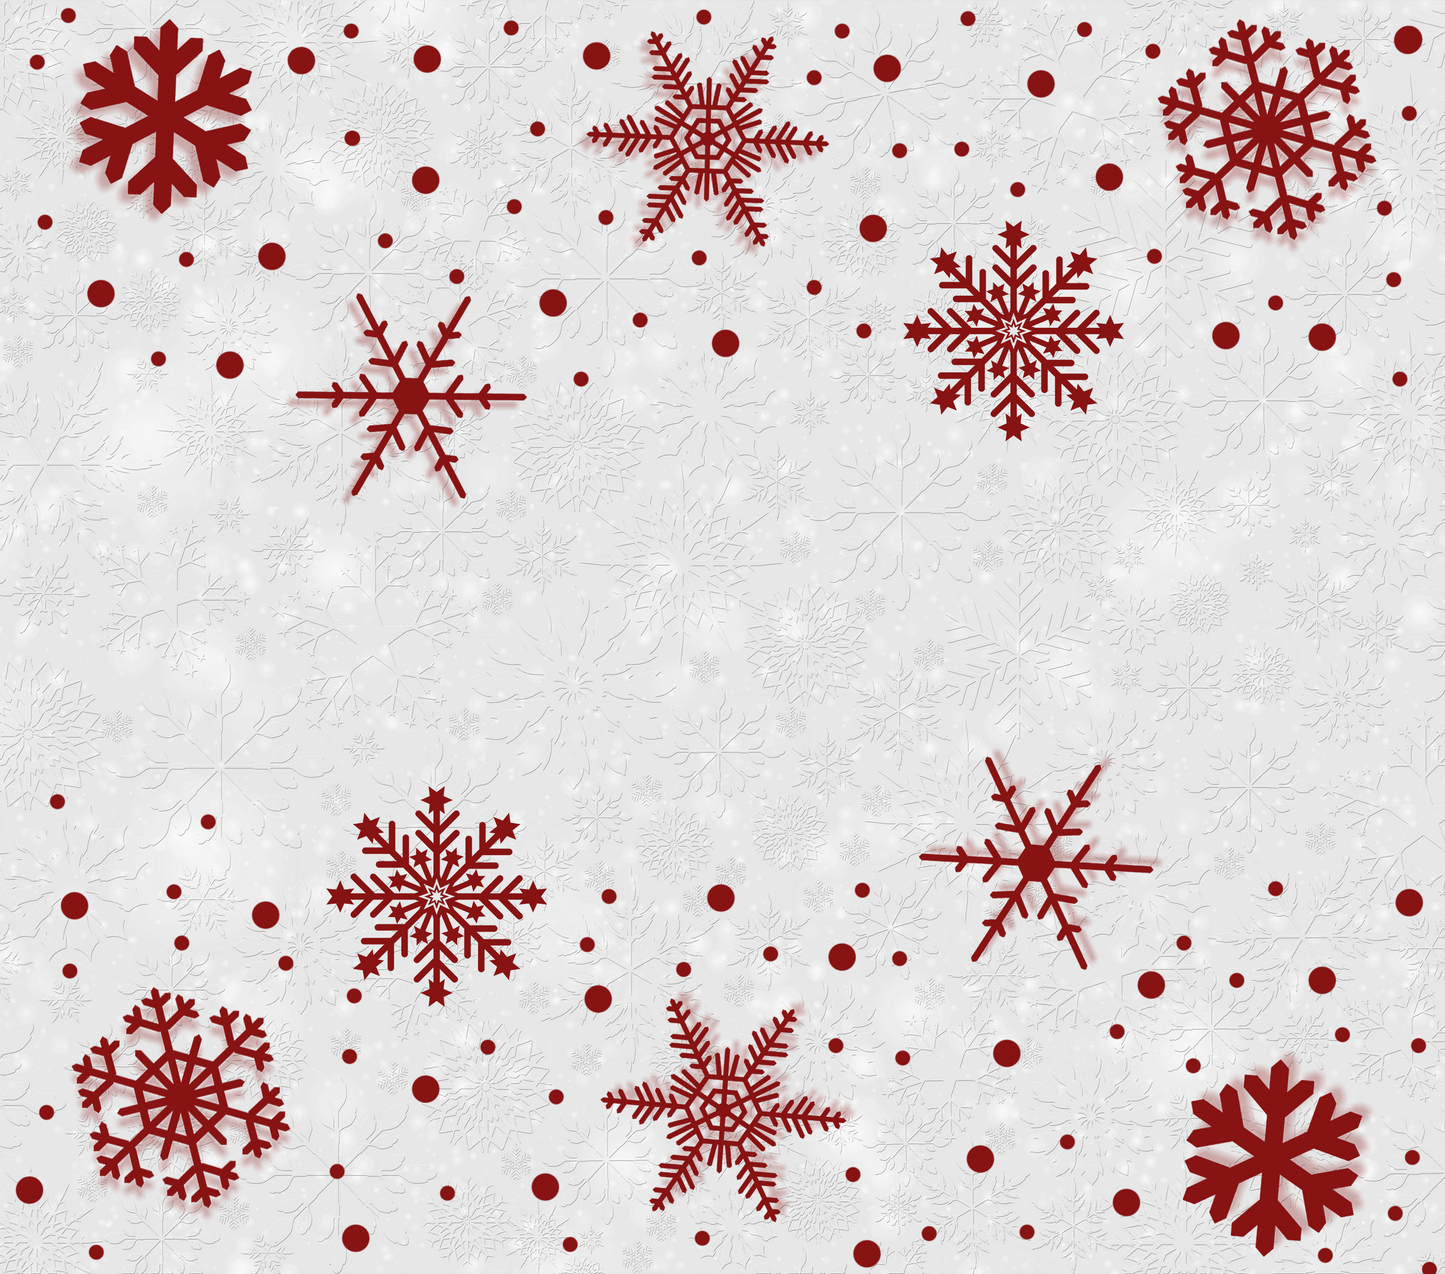 TW1969 red snowflake